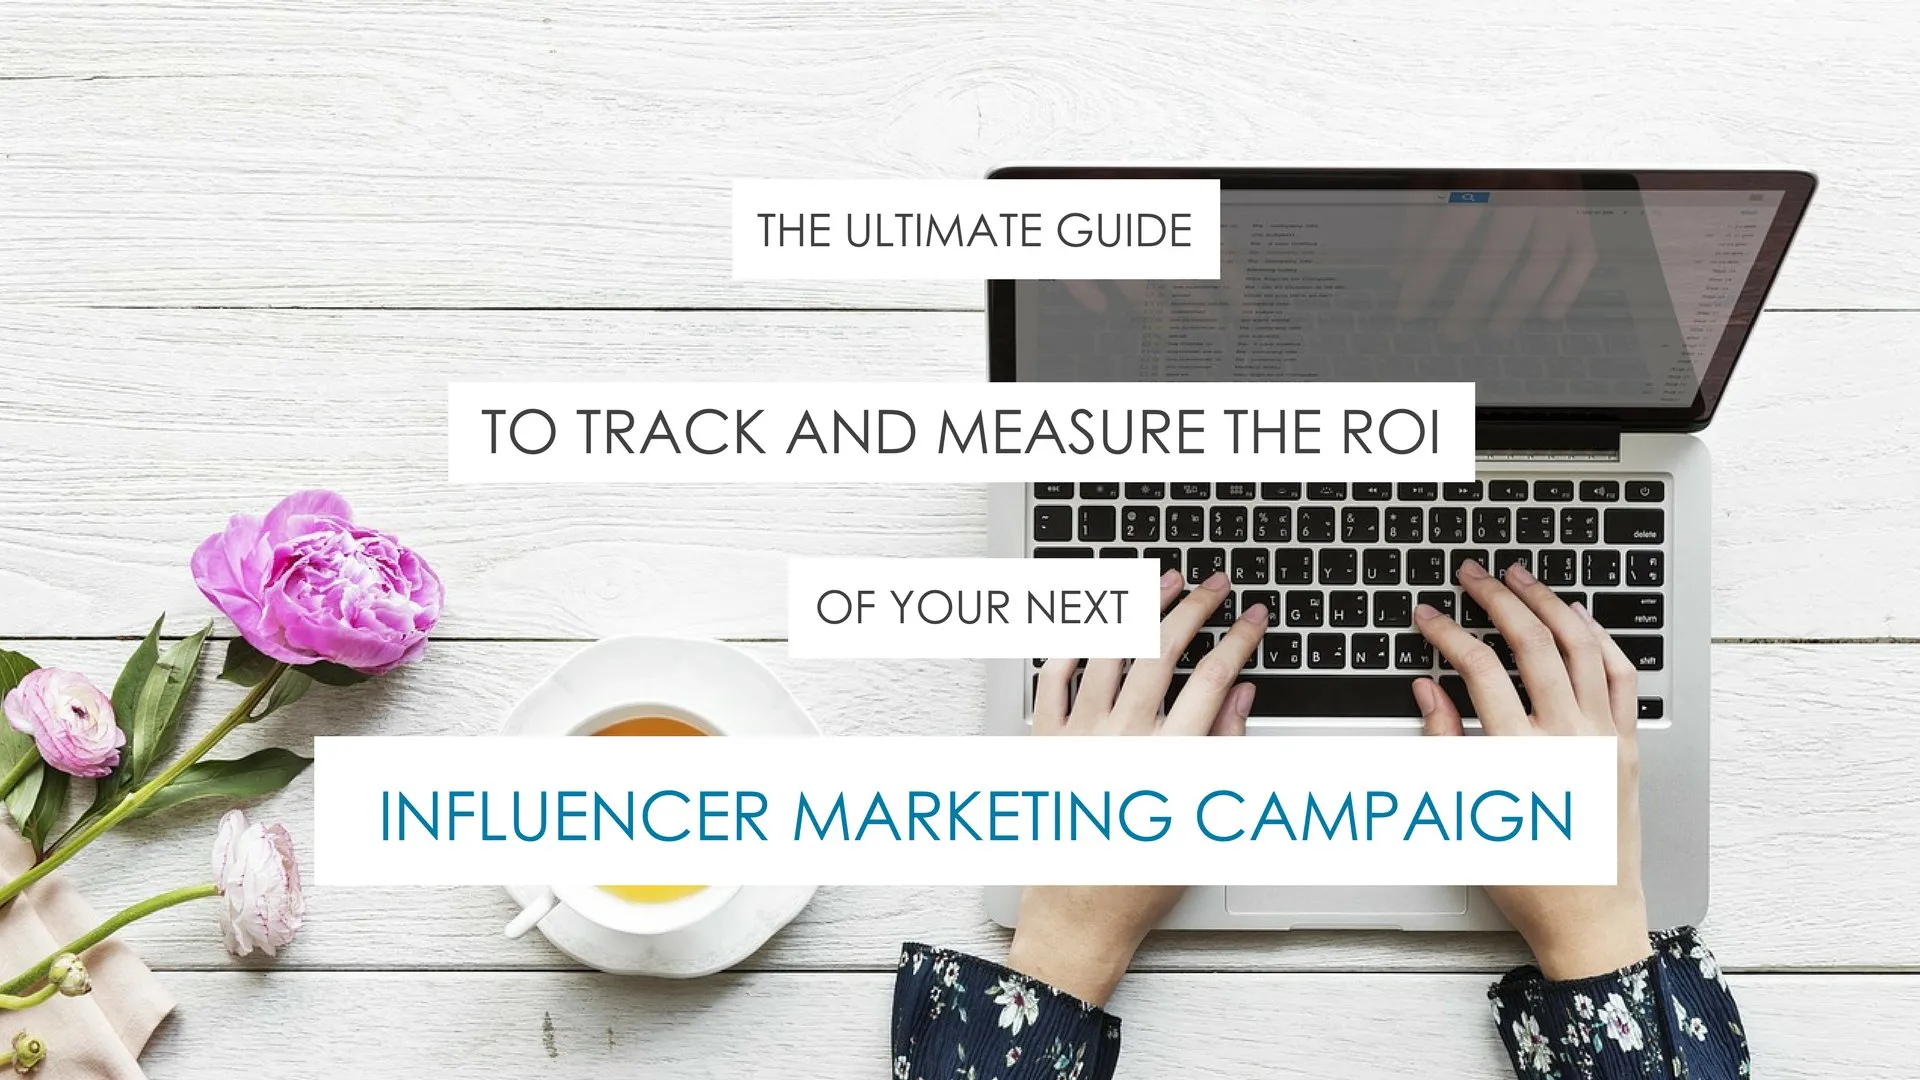 The Ultimate Guide to Track and Measure the ROI of Your Next Influencer Marketing Campaign